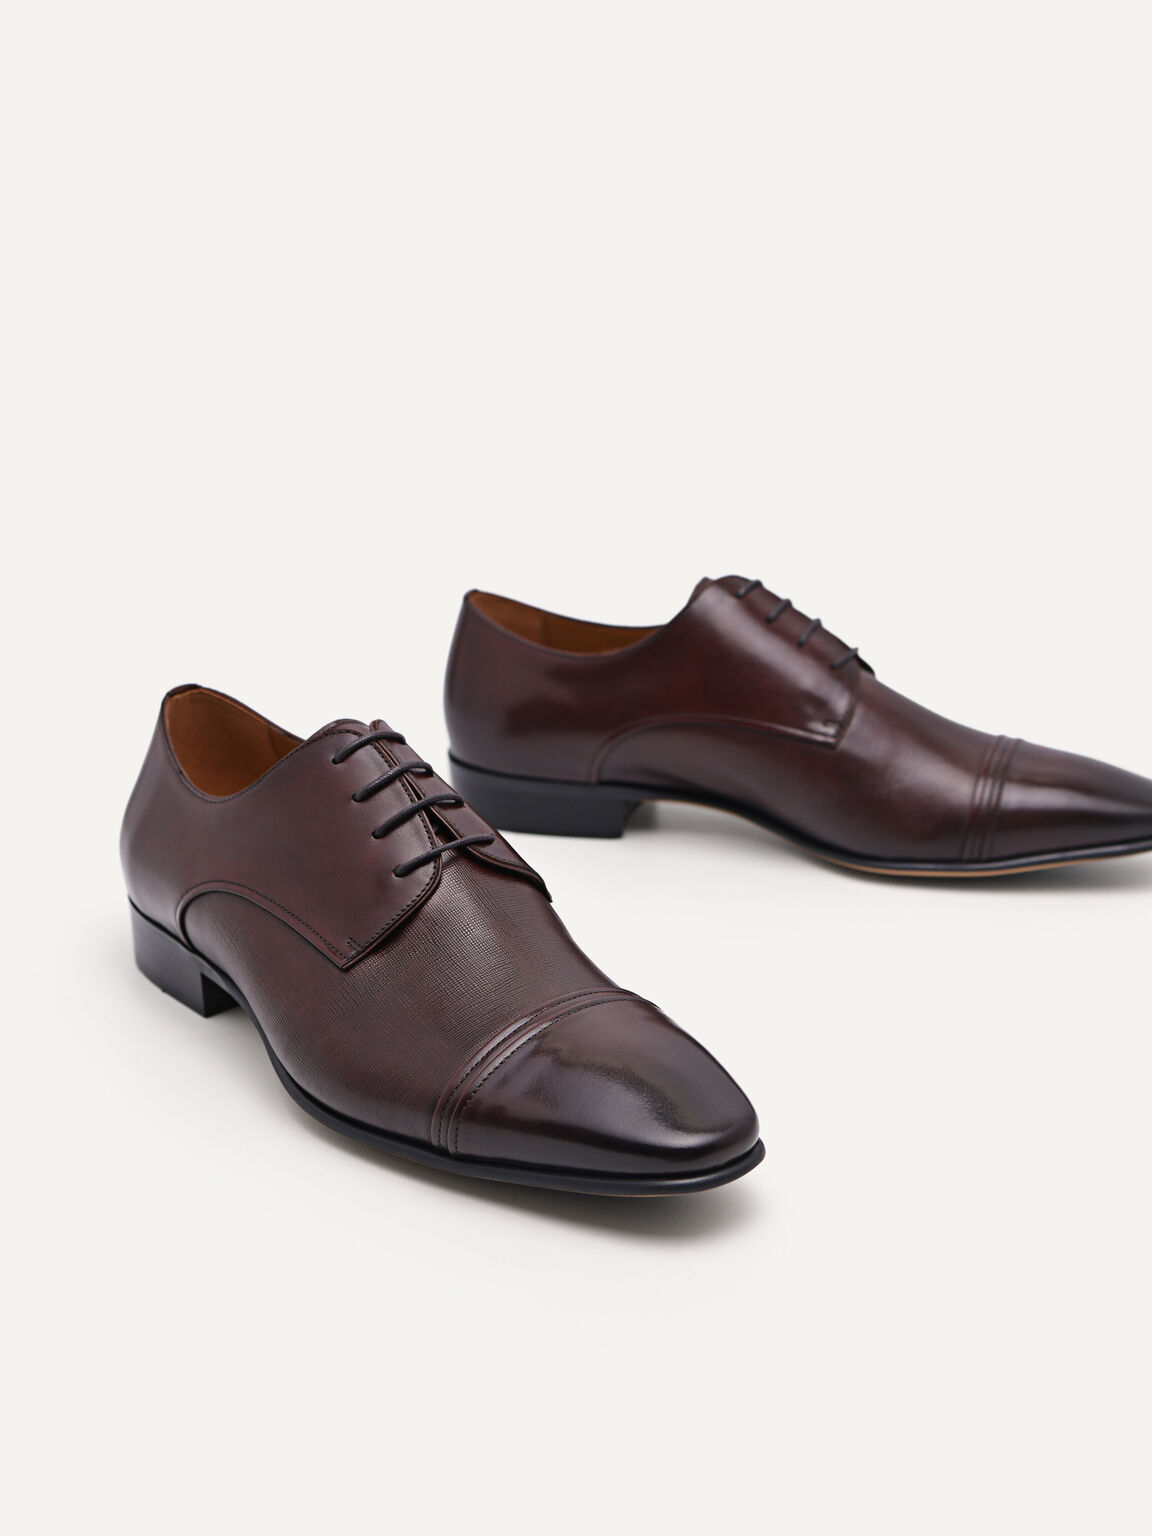 Leather Cap Toe Derby Shoes, Dark Brown